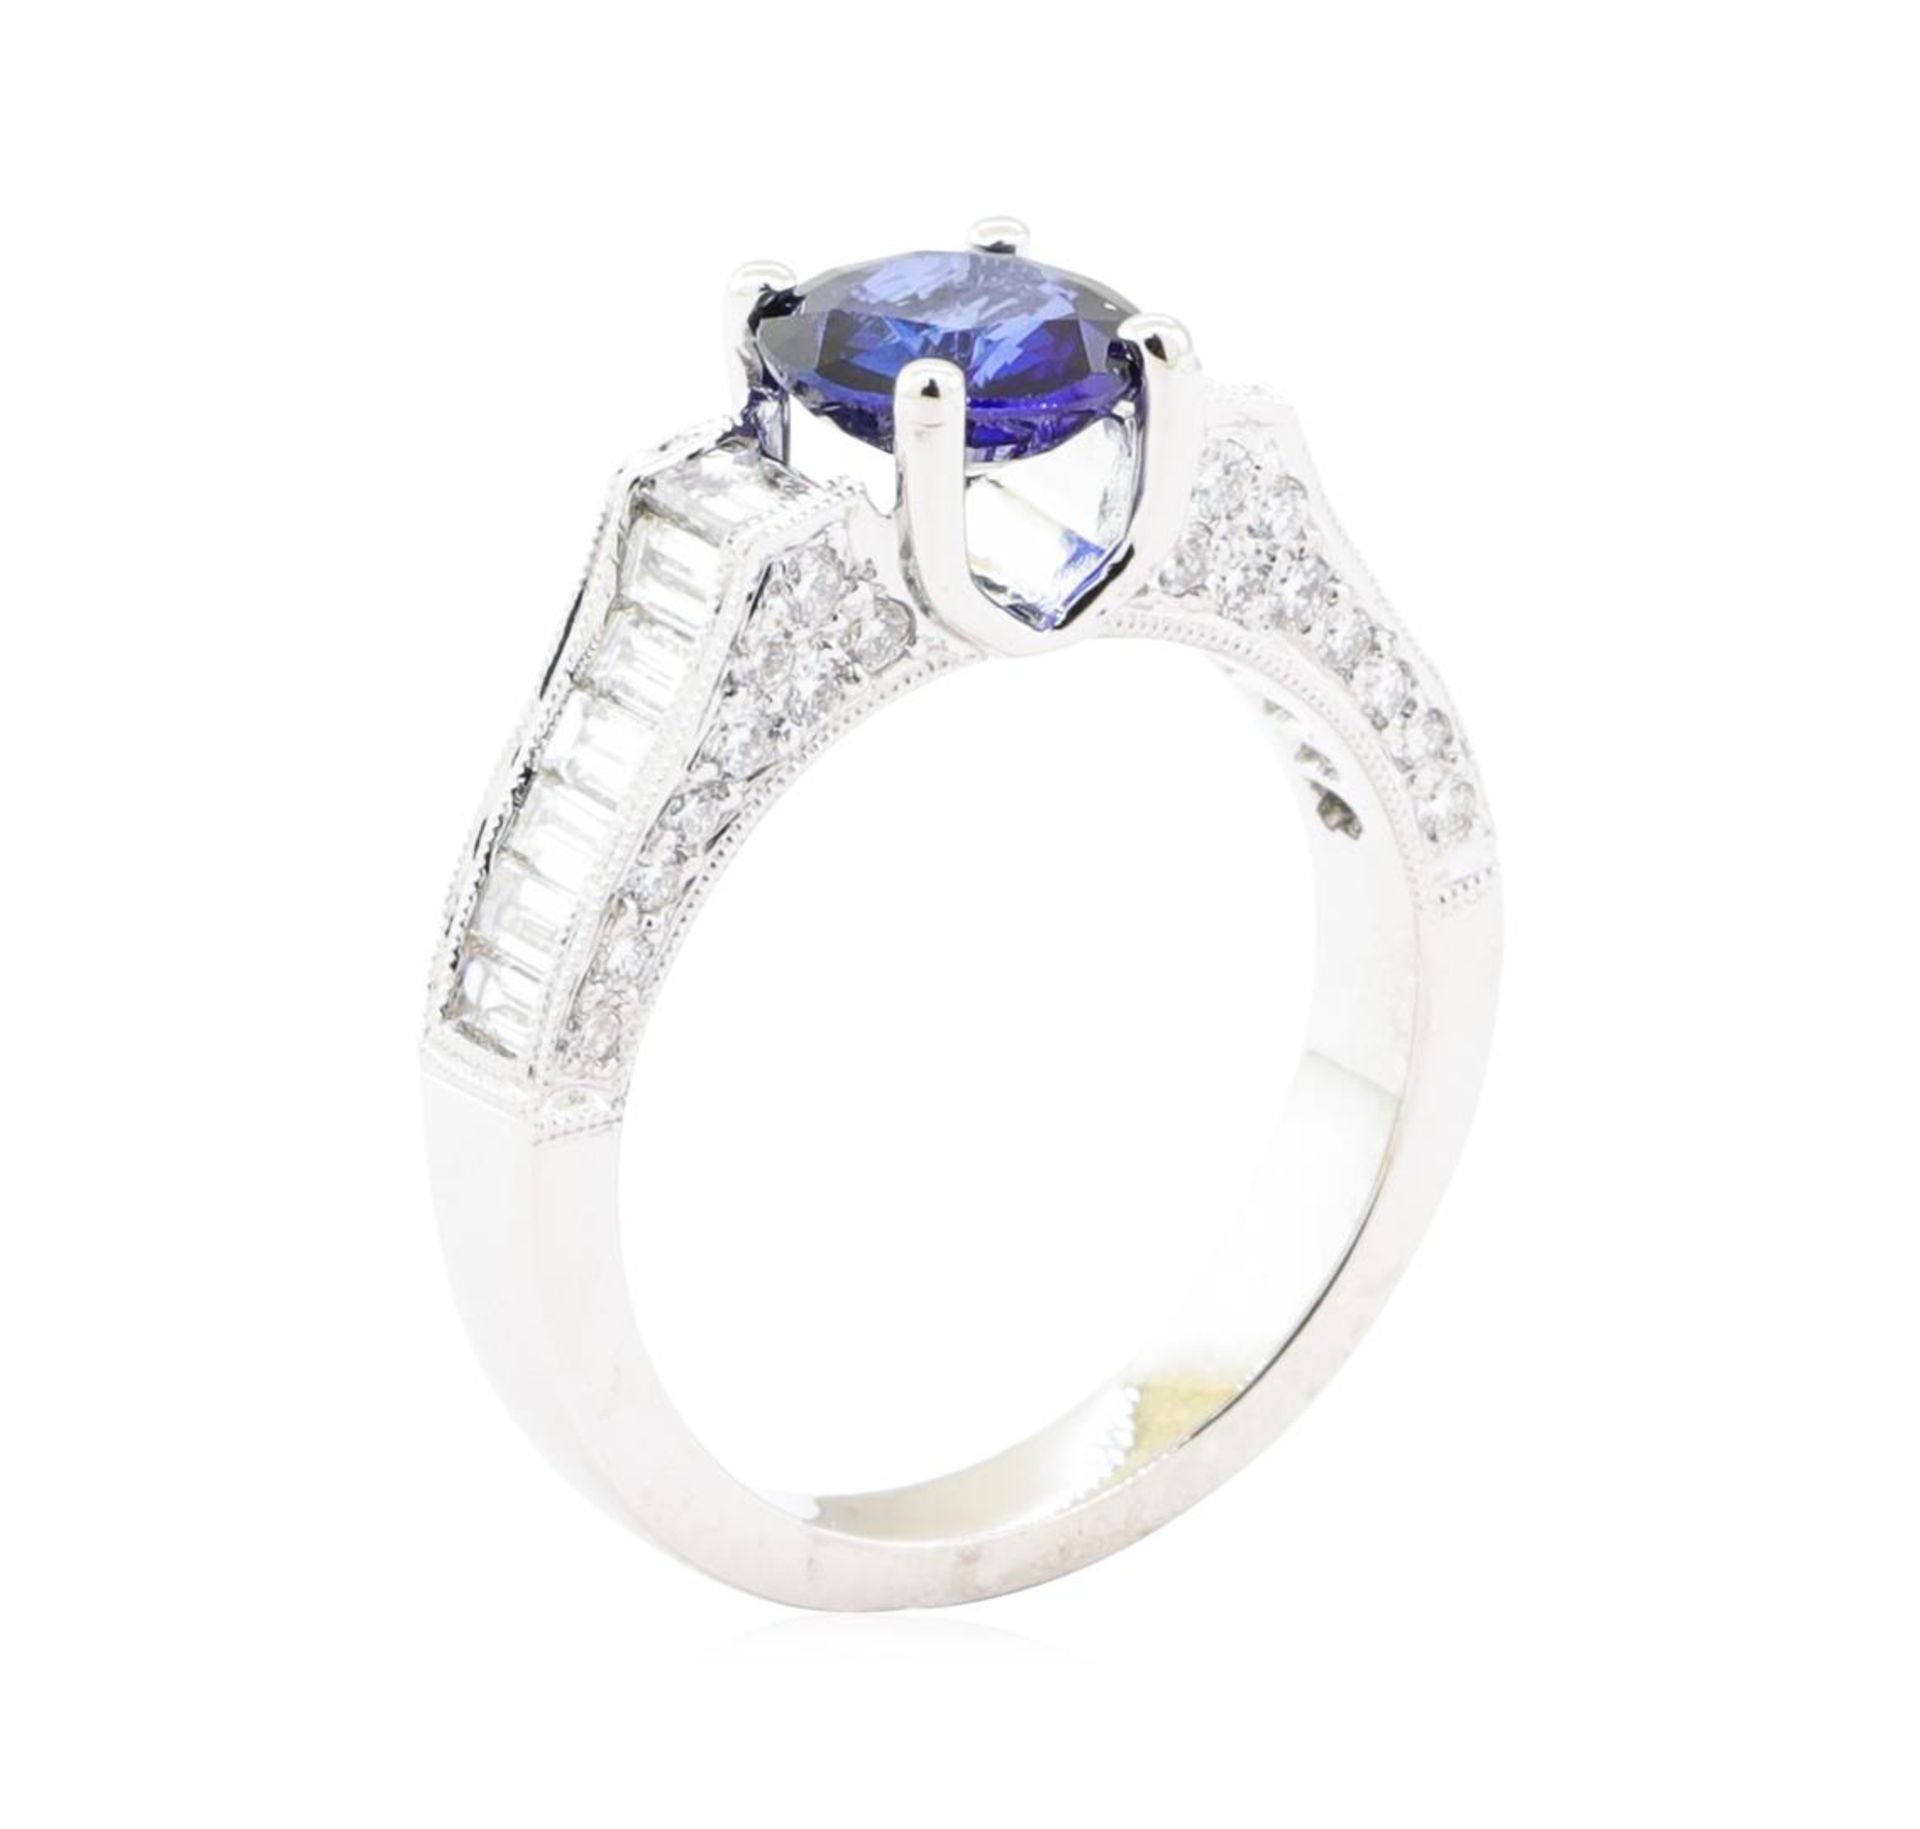 2.60 ctw Sapphire And Diamond Ring - 18KT White Gold - Image 4 of 5